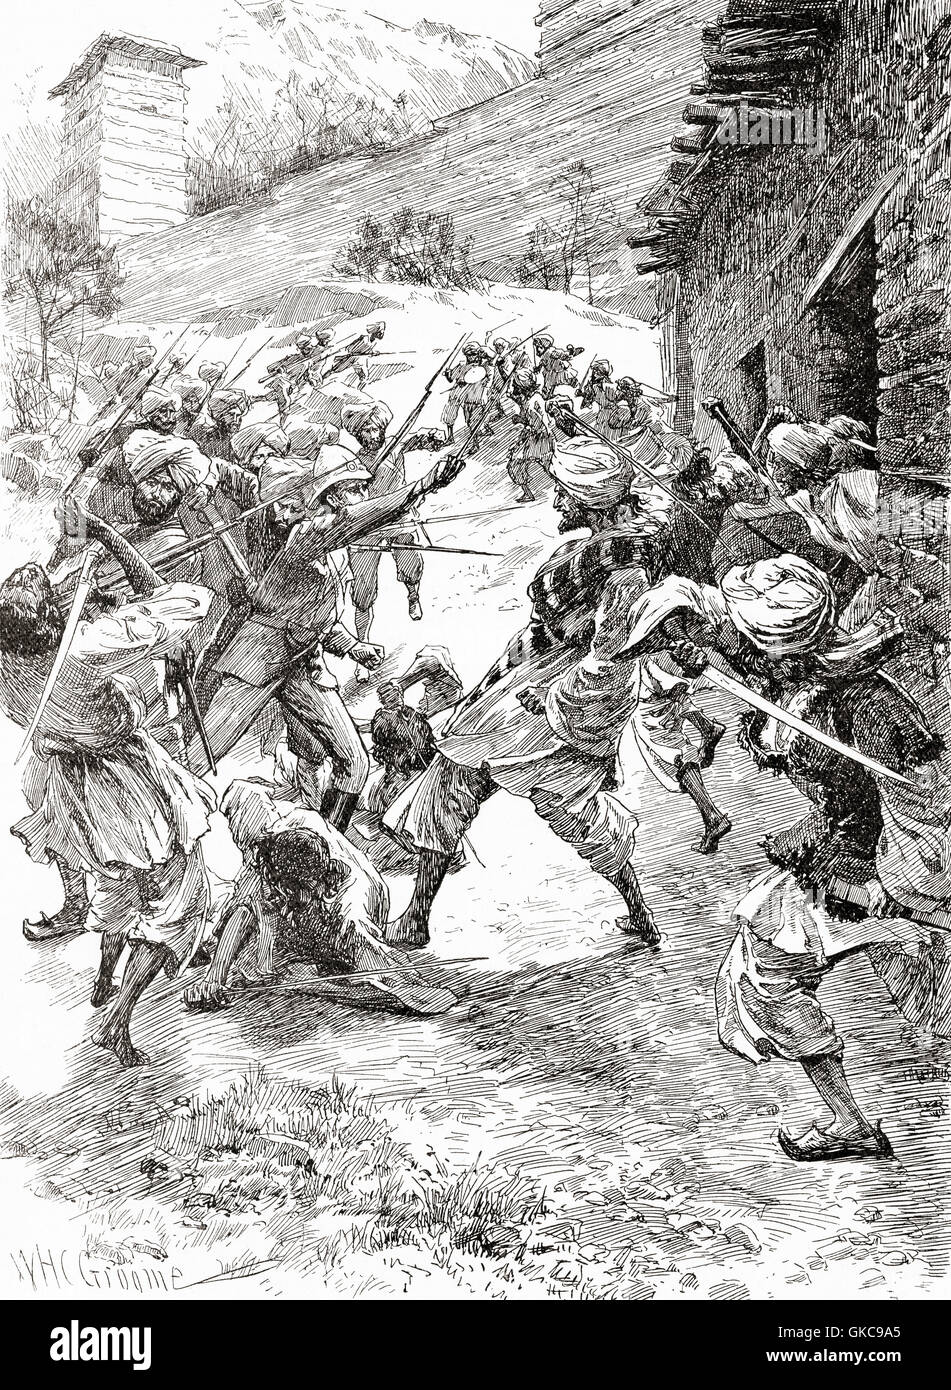 British troops from Peshawar, Pakistan attack the Chitrali mine where the Chitralis were digging a tunnel in order to blow open the fort at Chitral which was under siege after a local coup in 1895. Stock Photo